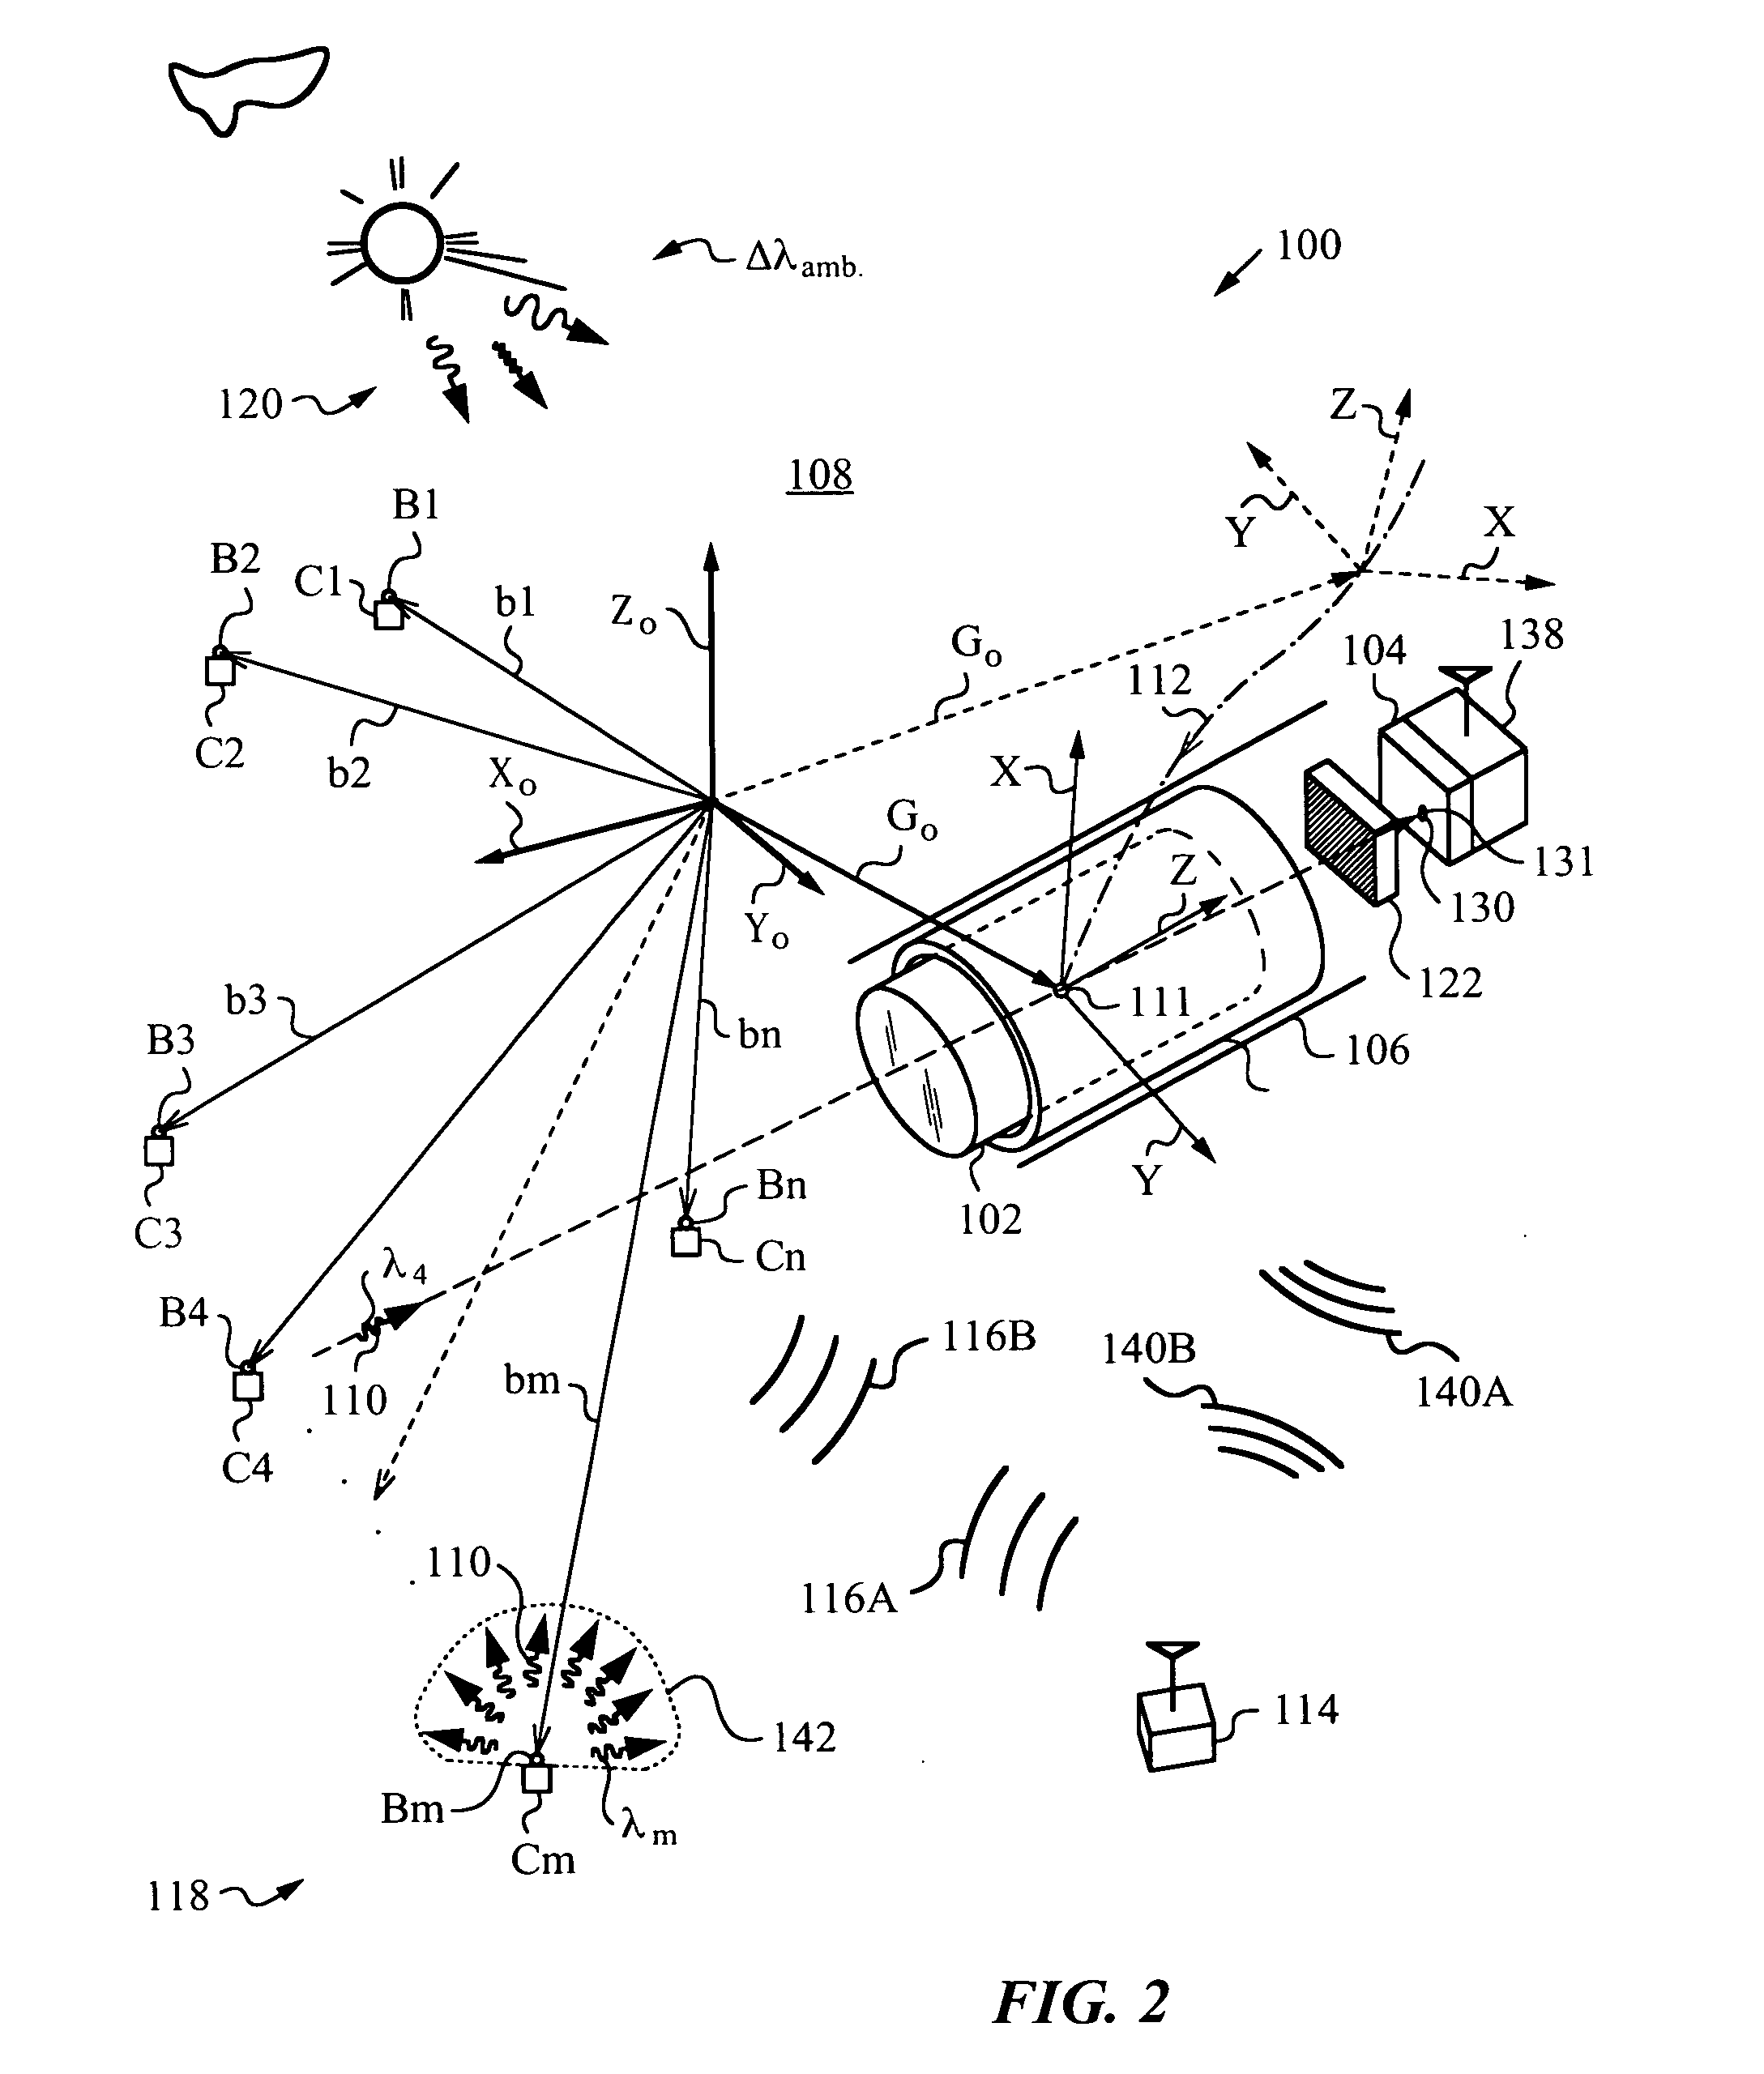 Optical navigation apparatus using fixed beacons and a centroid sensing device